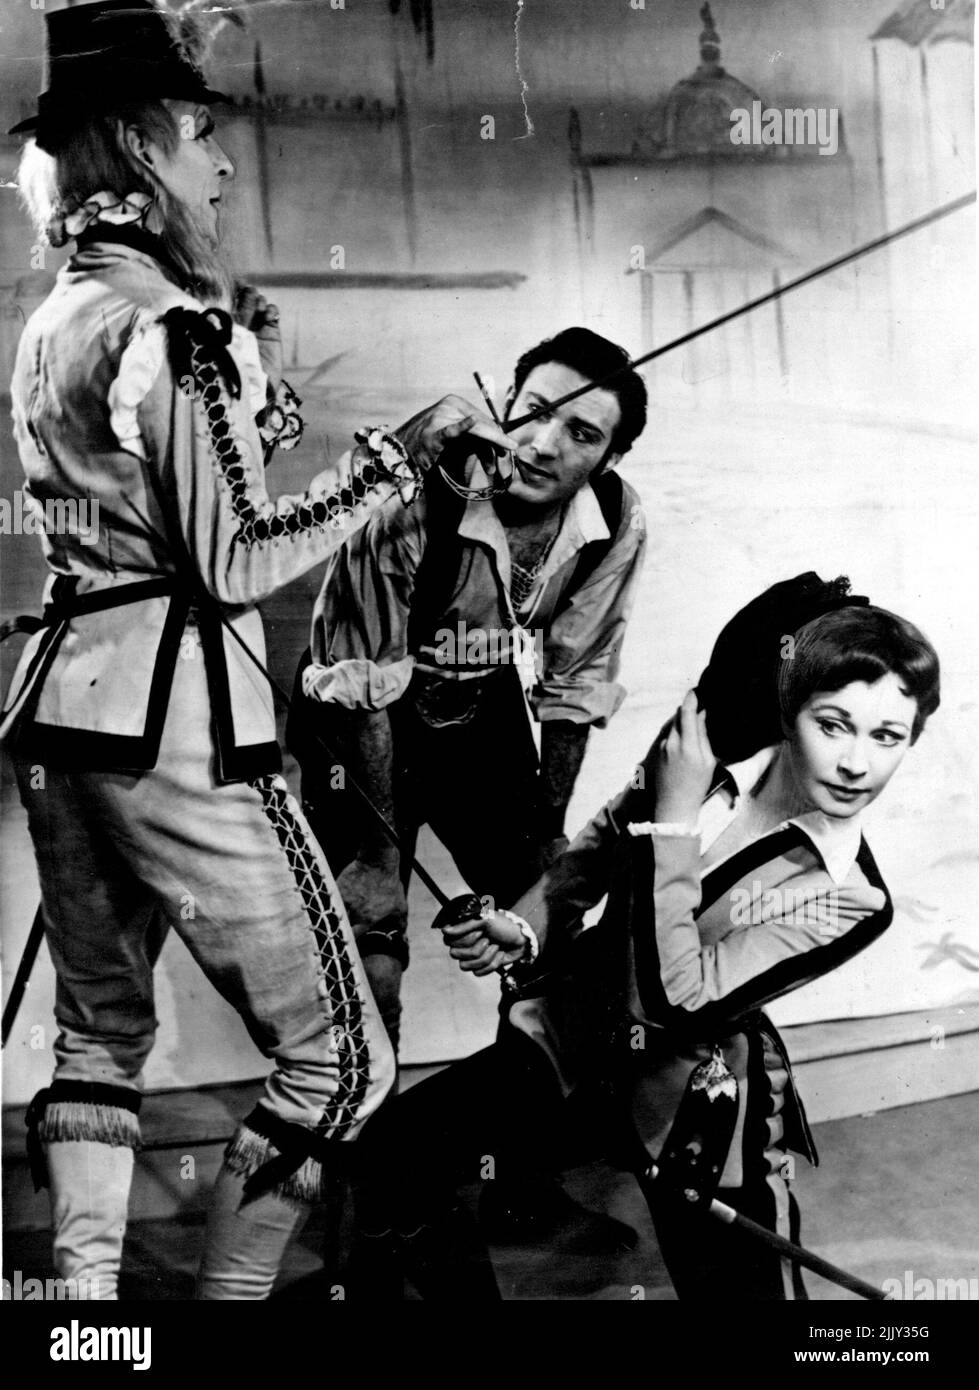 Viola (Vivien Leigh) evaes a thrust by Sir Andrew Aguechek (Michael Denison), left, while Fabin (Lee Montague) looks on during a rehearsal of 'Twelfth Night' at Stratford. Sir Laurence Olivier and his wife, Vivien Leigh, are producing the pay for the 96th Shakespeare Memorial Festival. April 23, 1955. Stock Photo